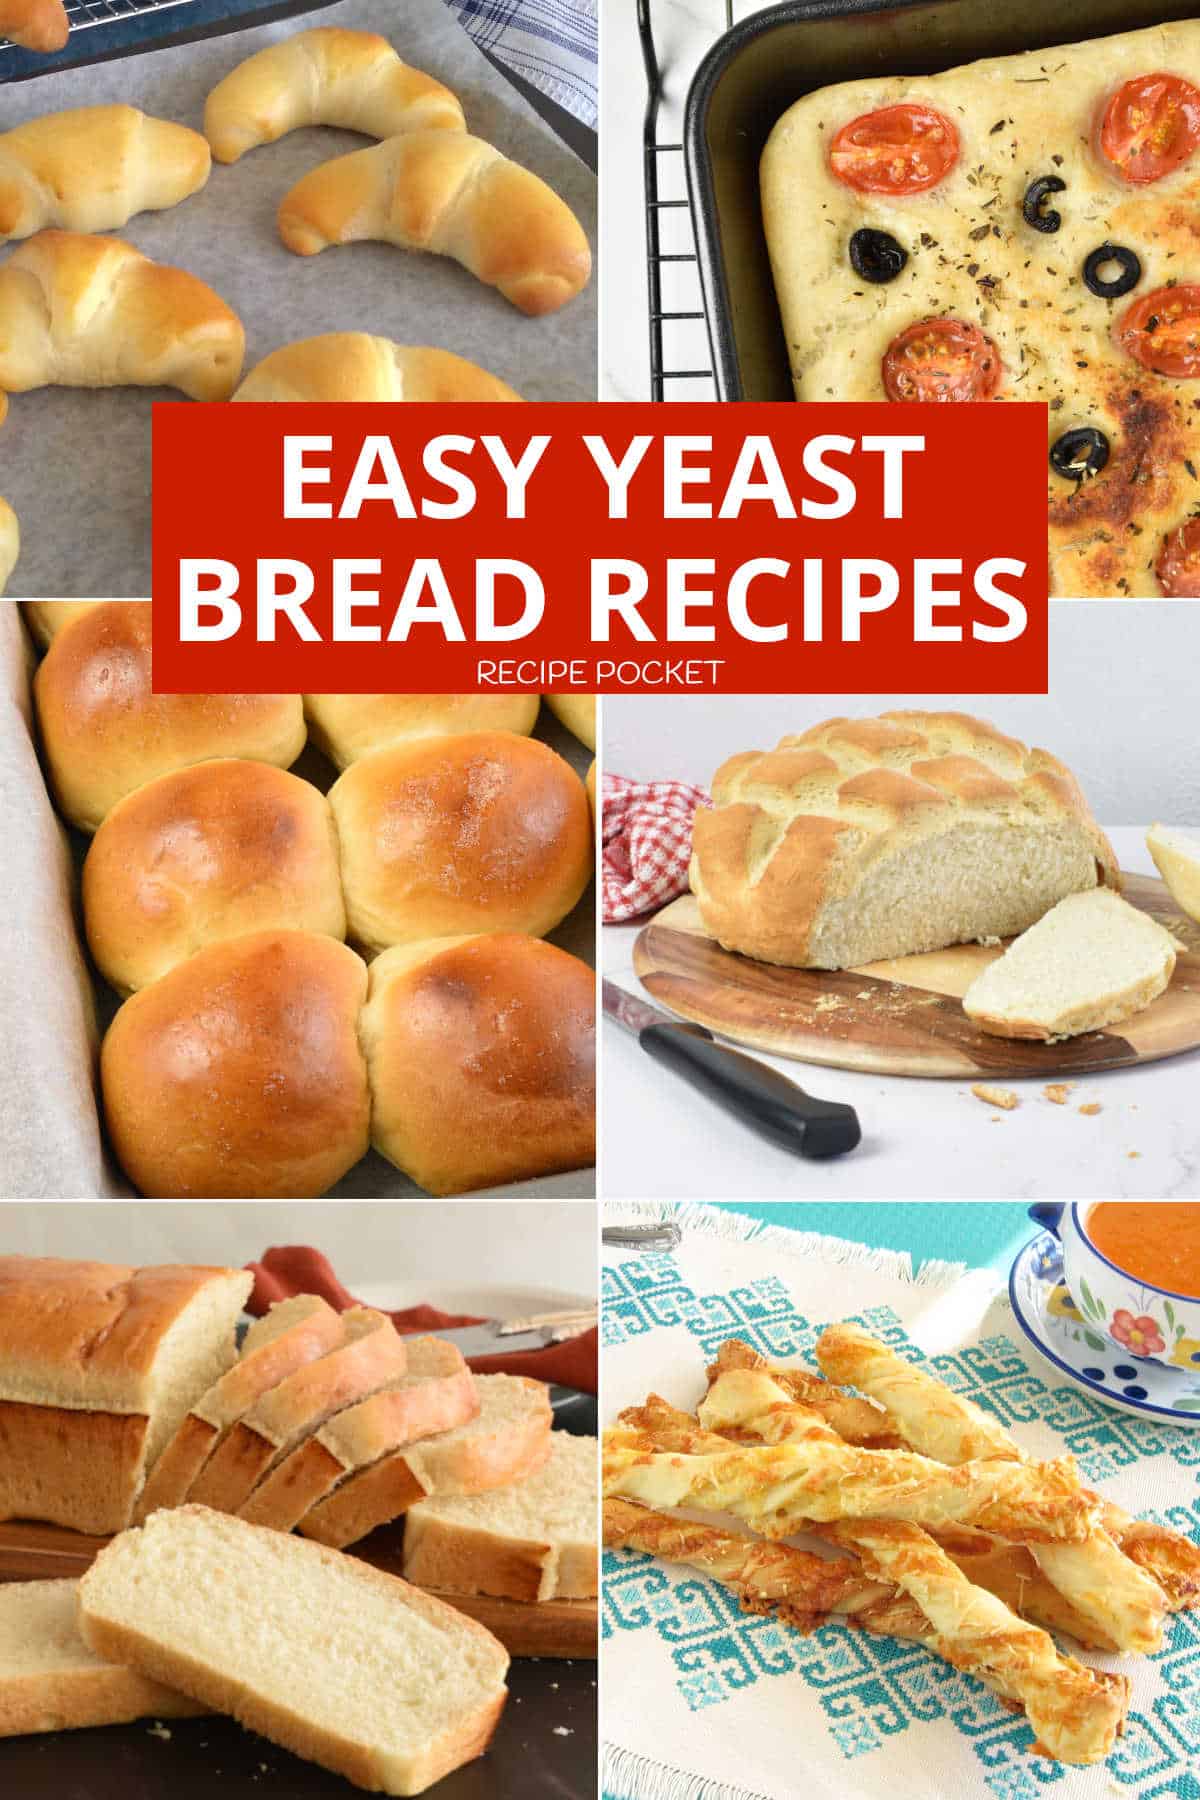 Image collage for easy yeast bread recipes blog post.